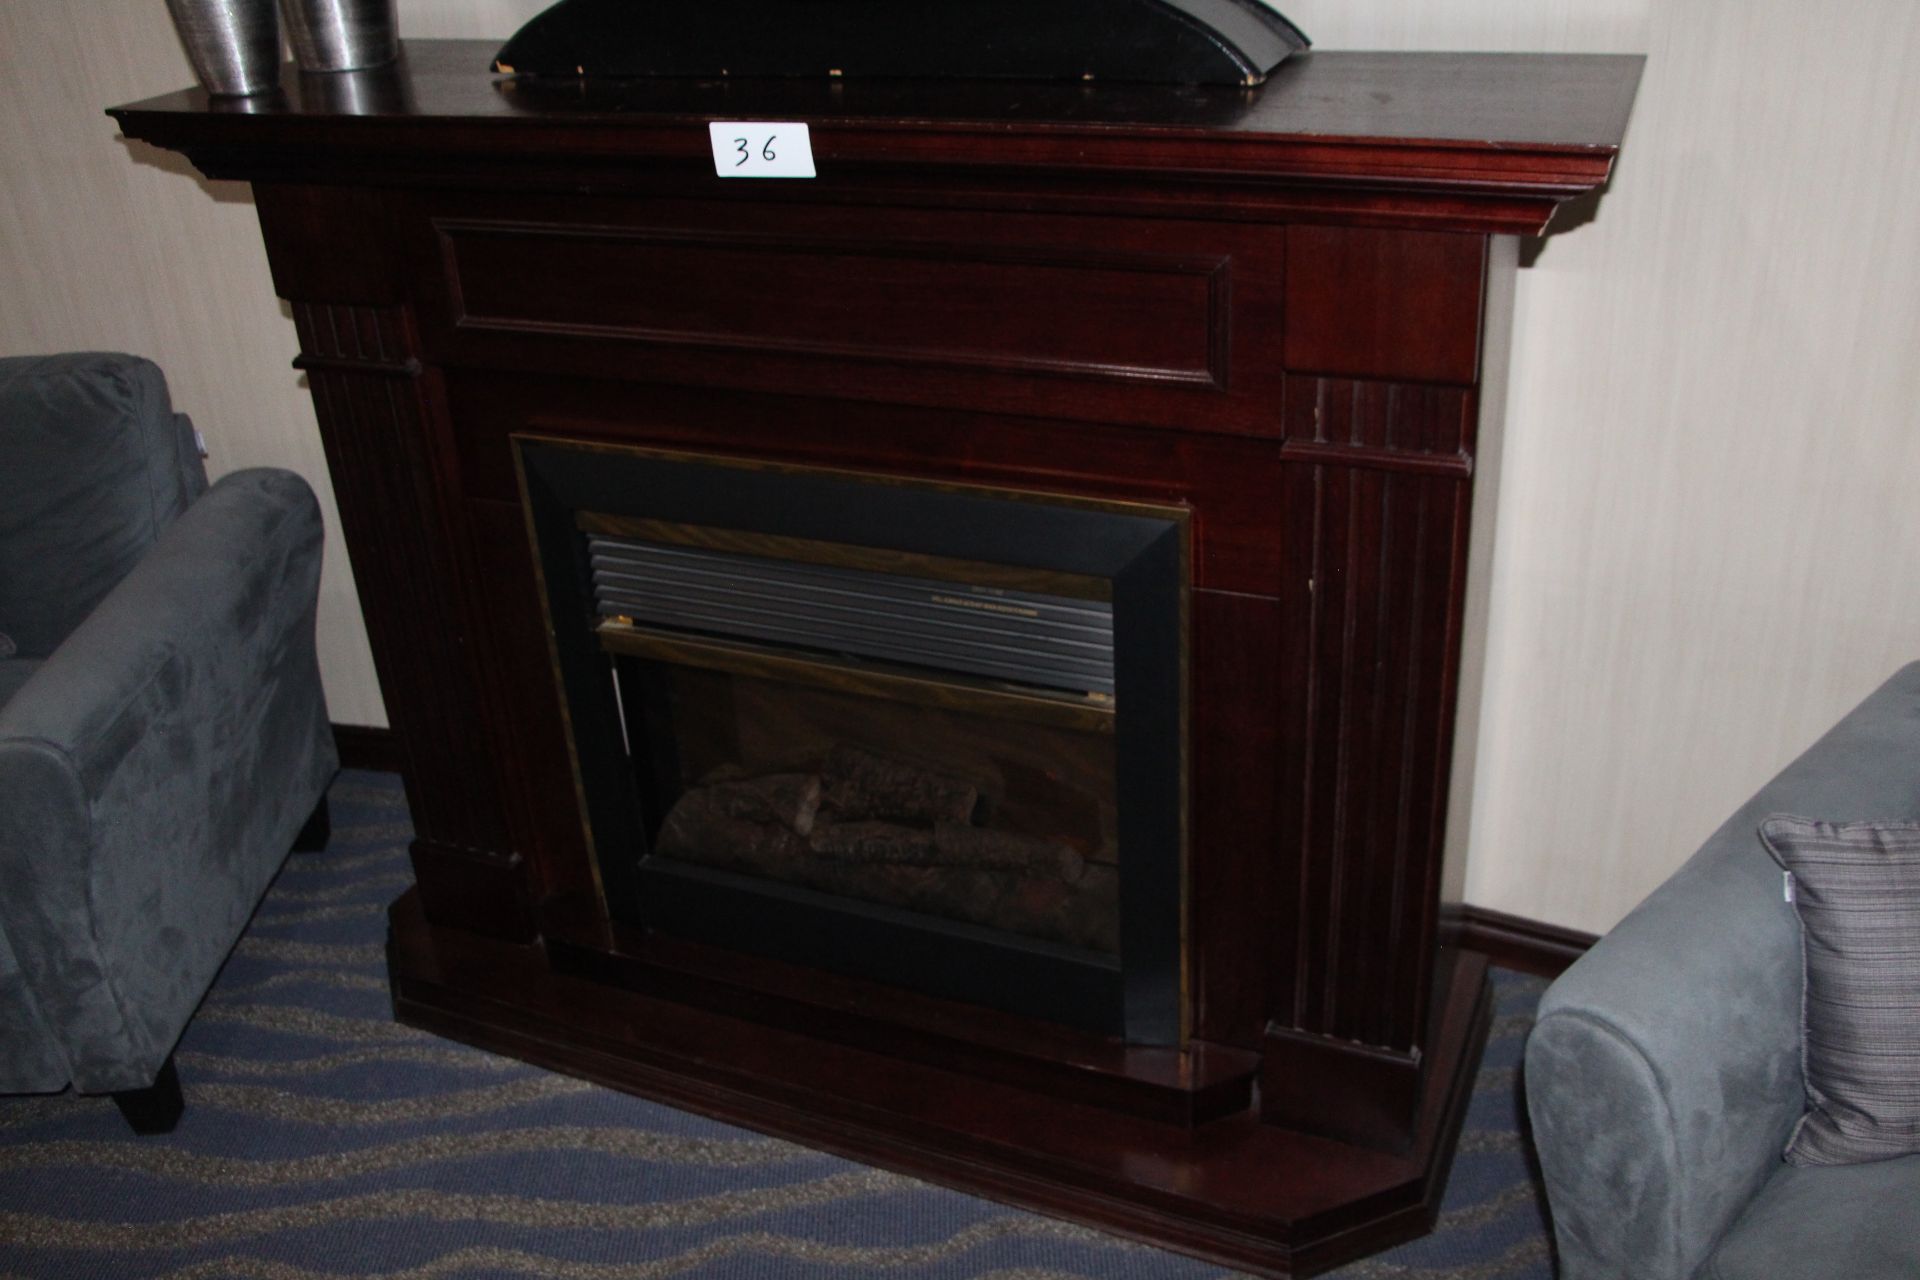 Electric fireplace c/w wooden mantel - Image 2 of 2